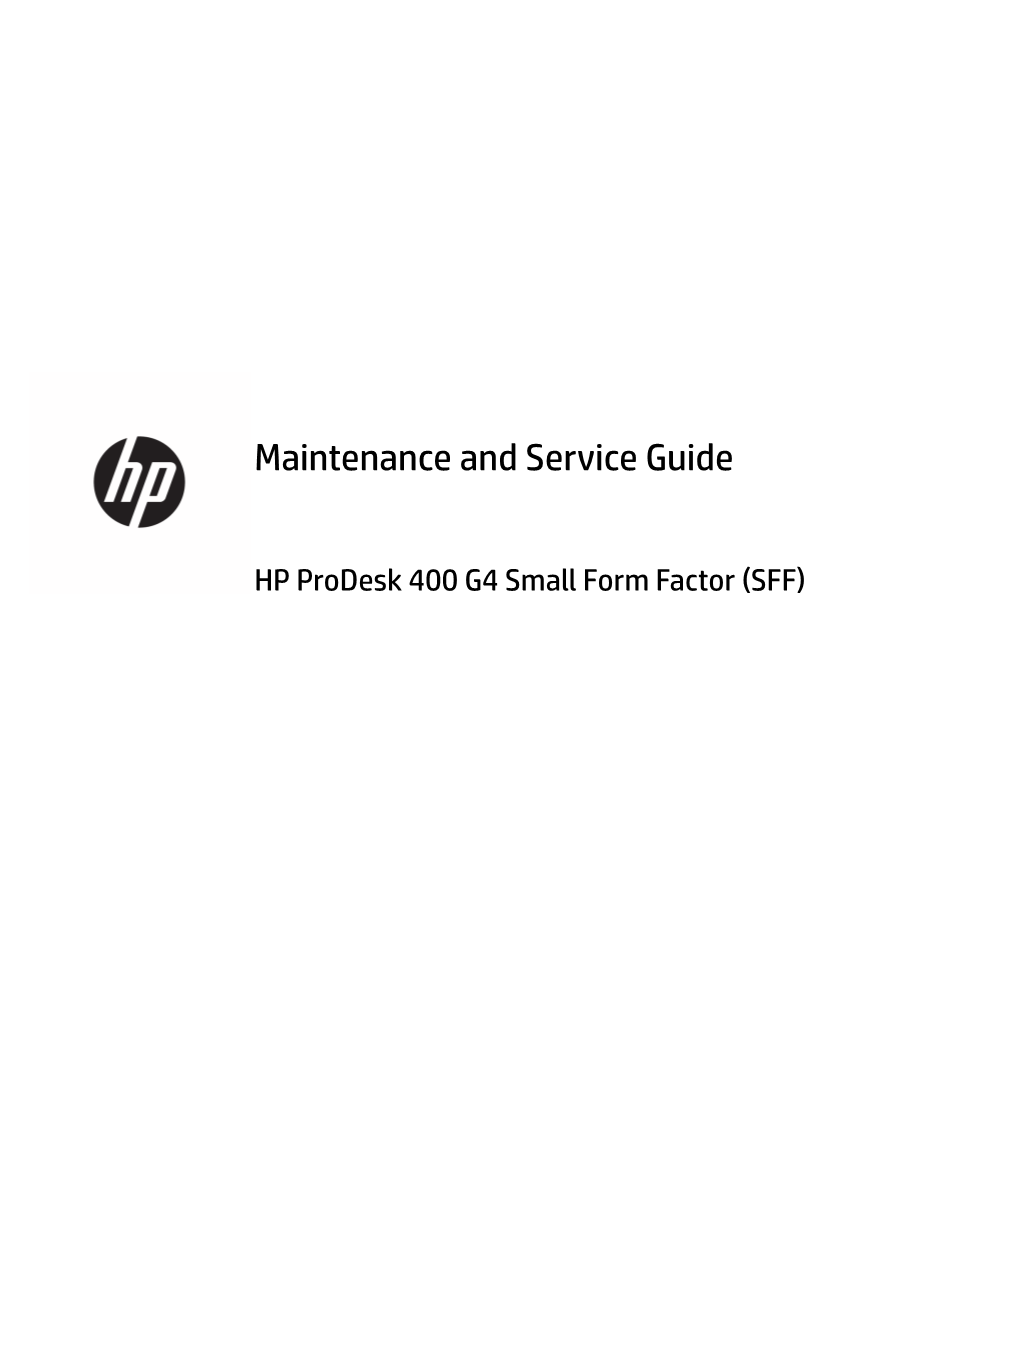 Maintenance and Service Guide HP Prodesk 400 G4 Small